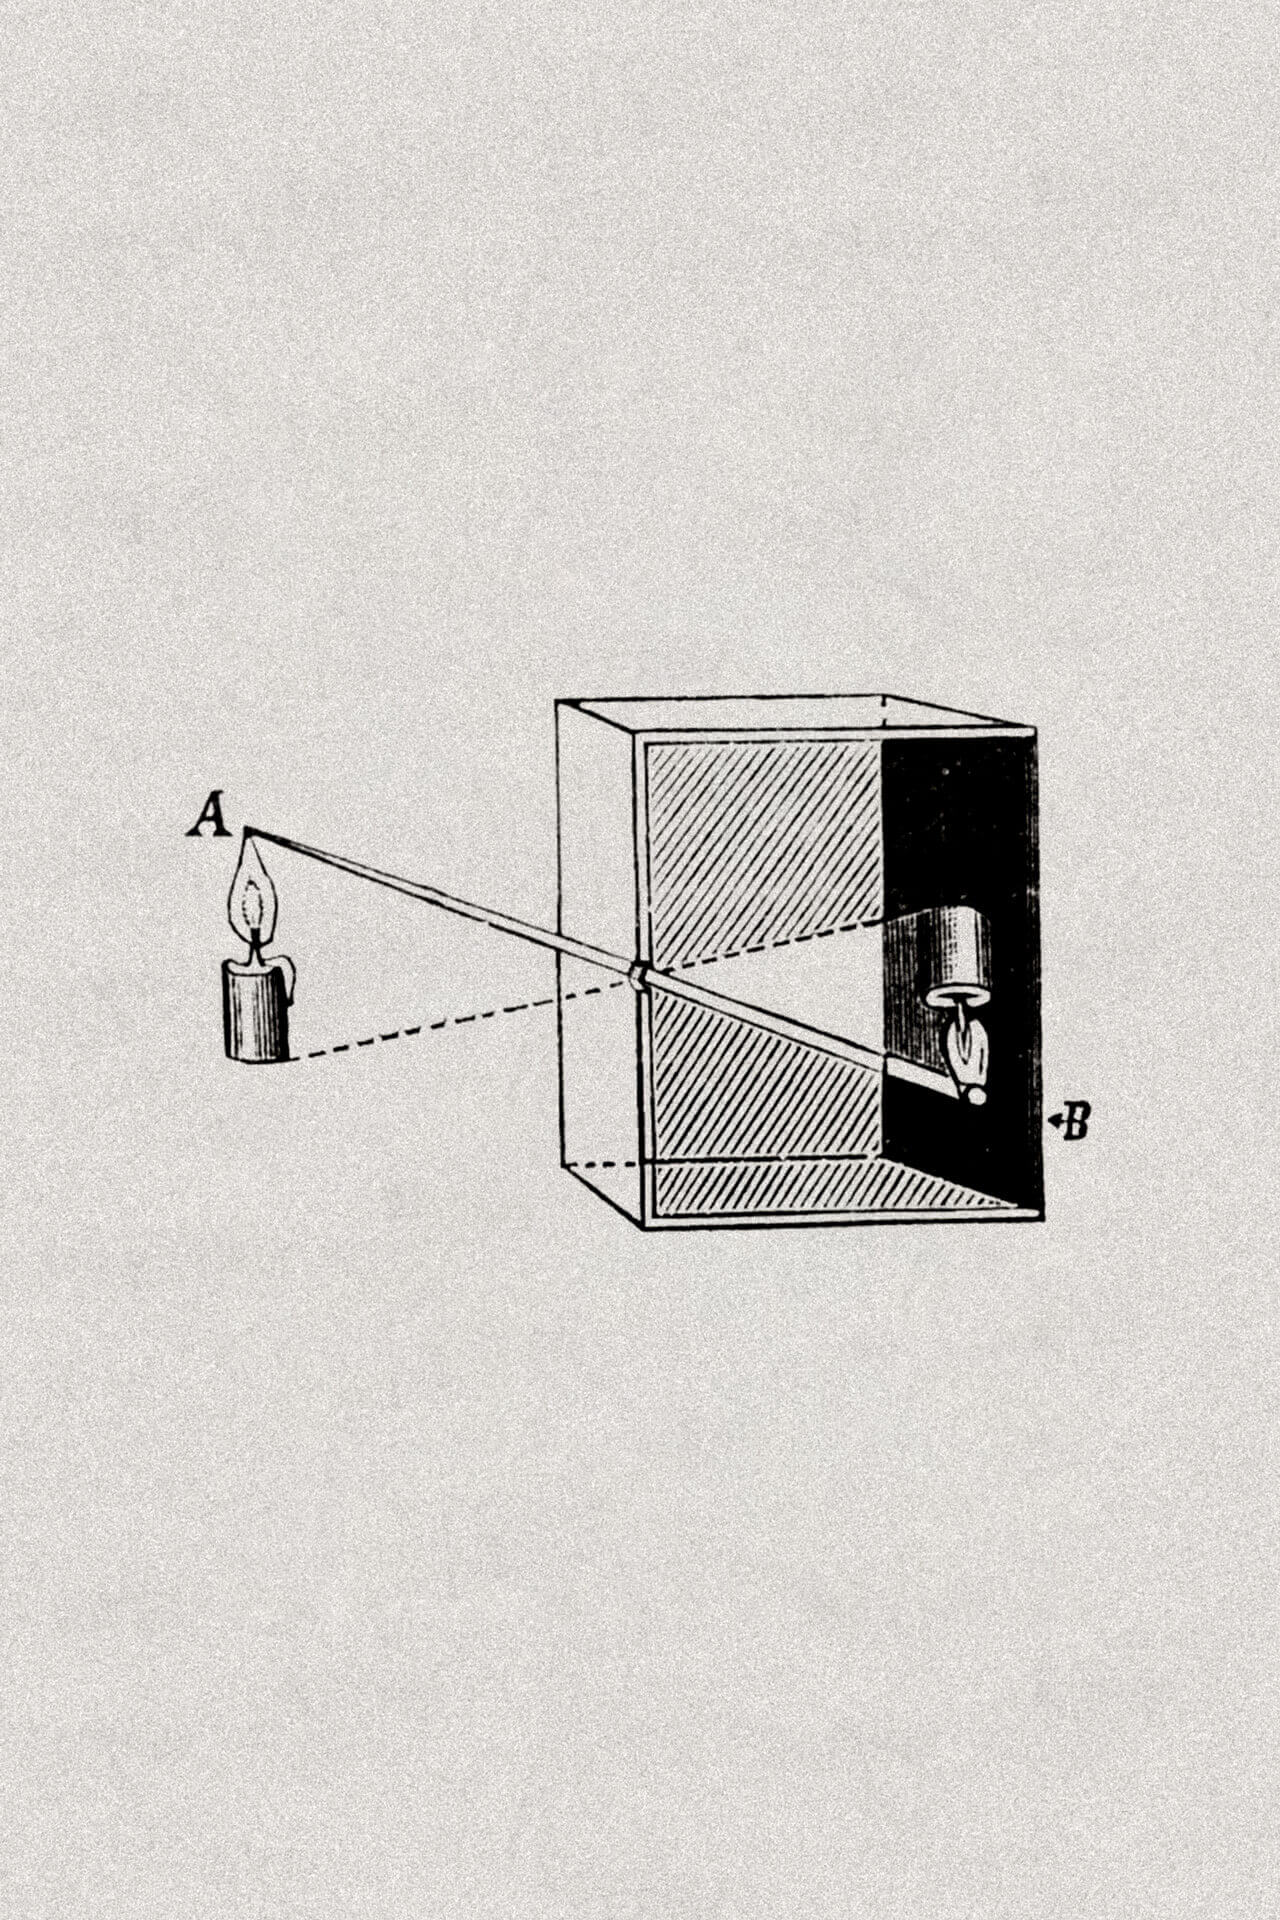 Illustration of the camera oscura principle in A4 portrait format